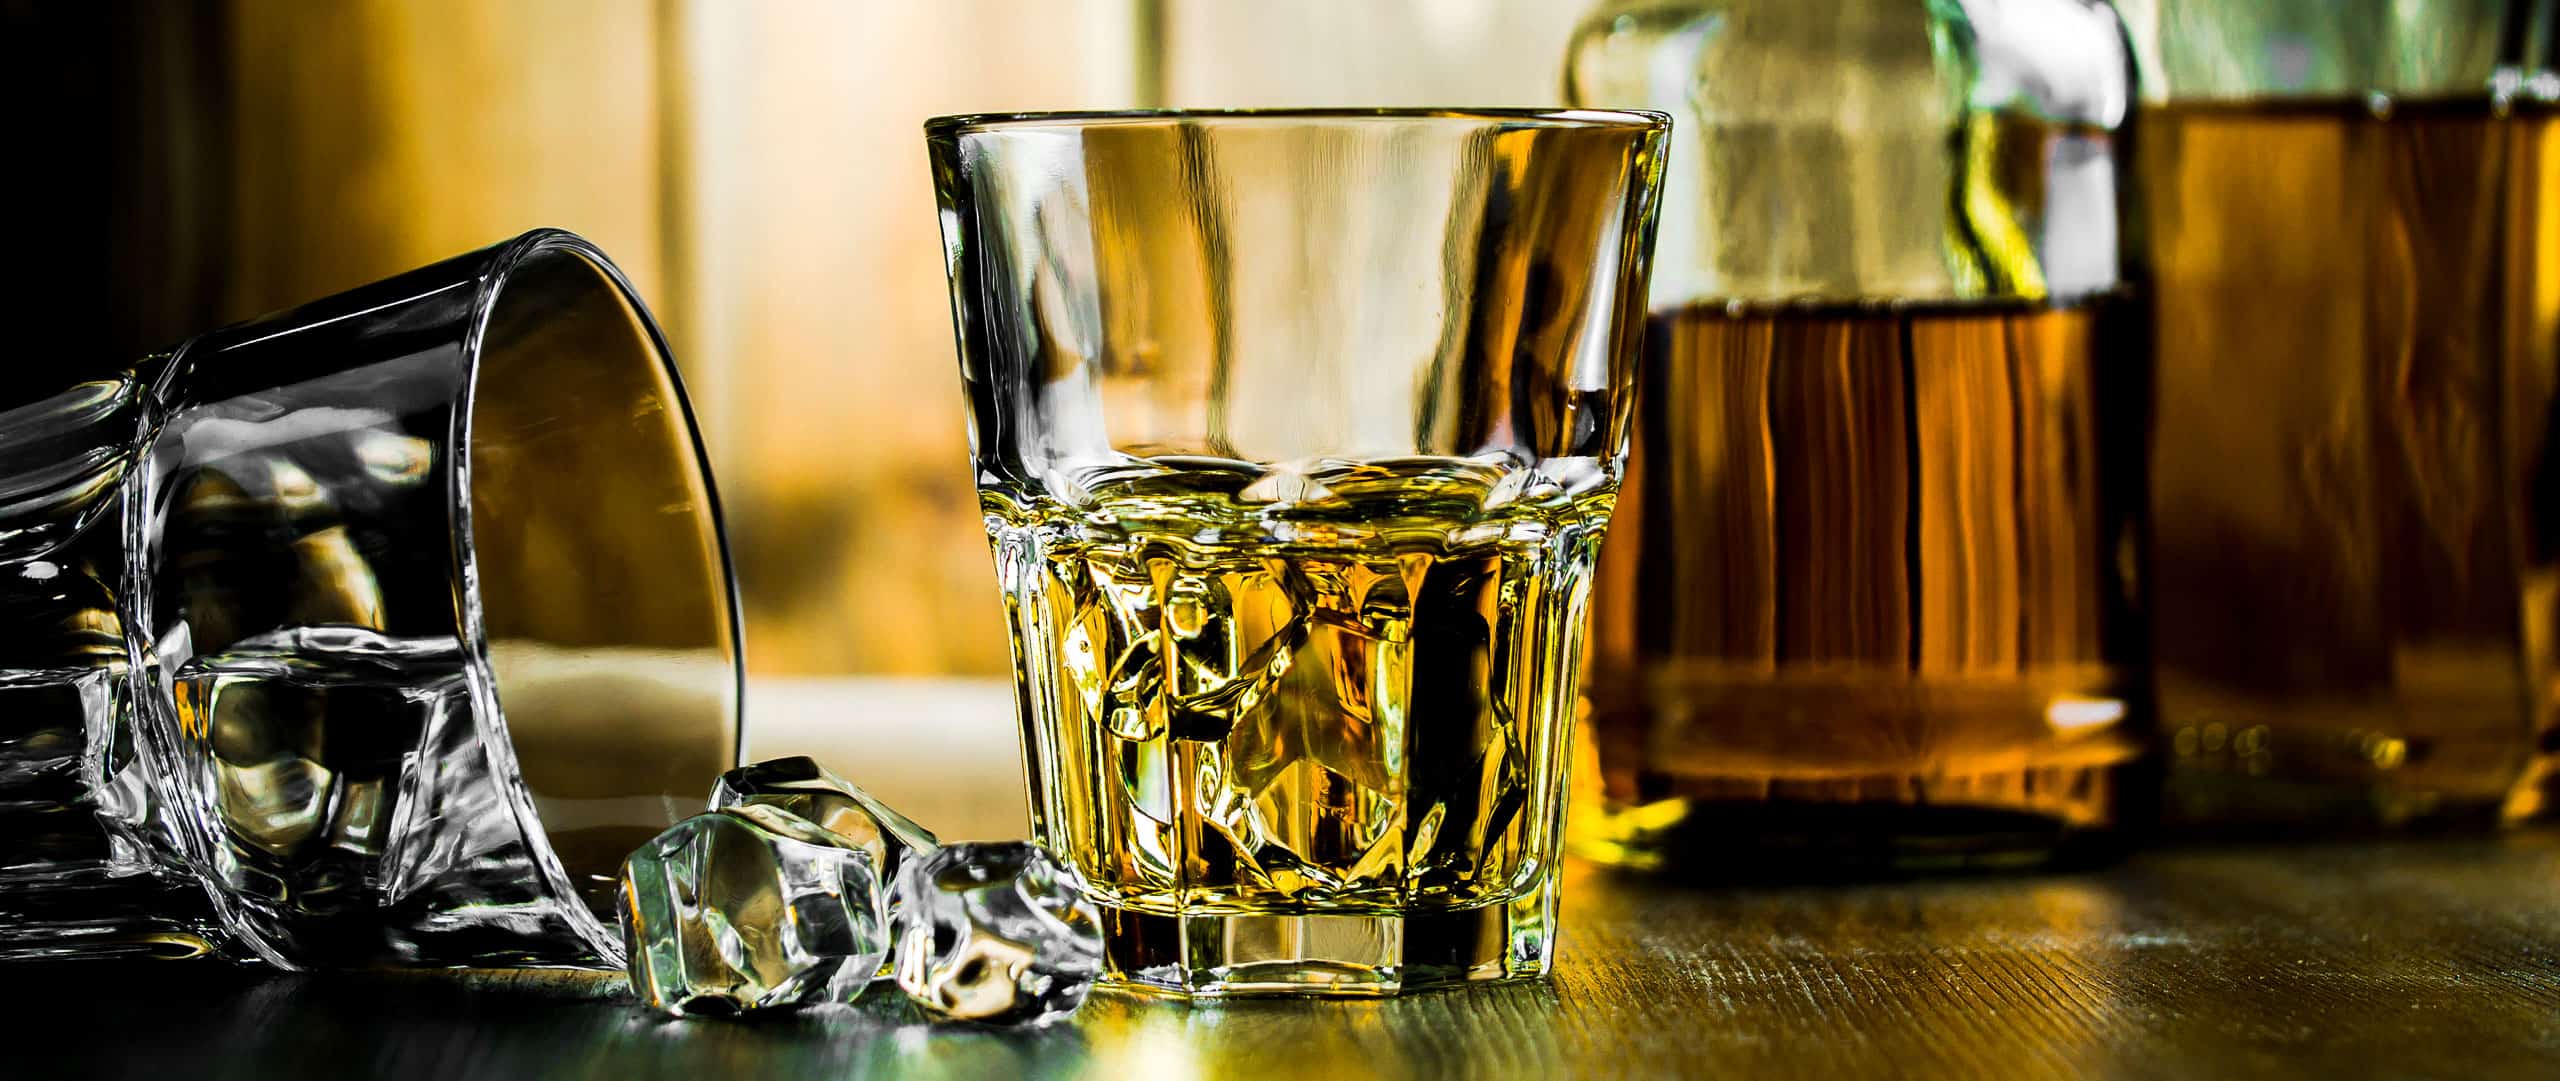 10 Signs of Alcohol Abuse in Older Adults